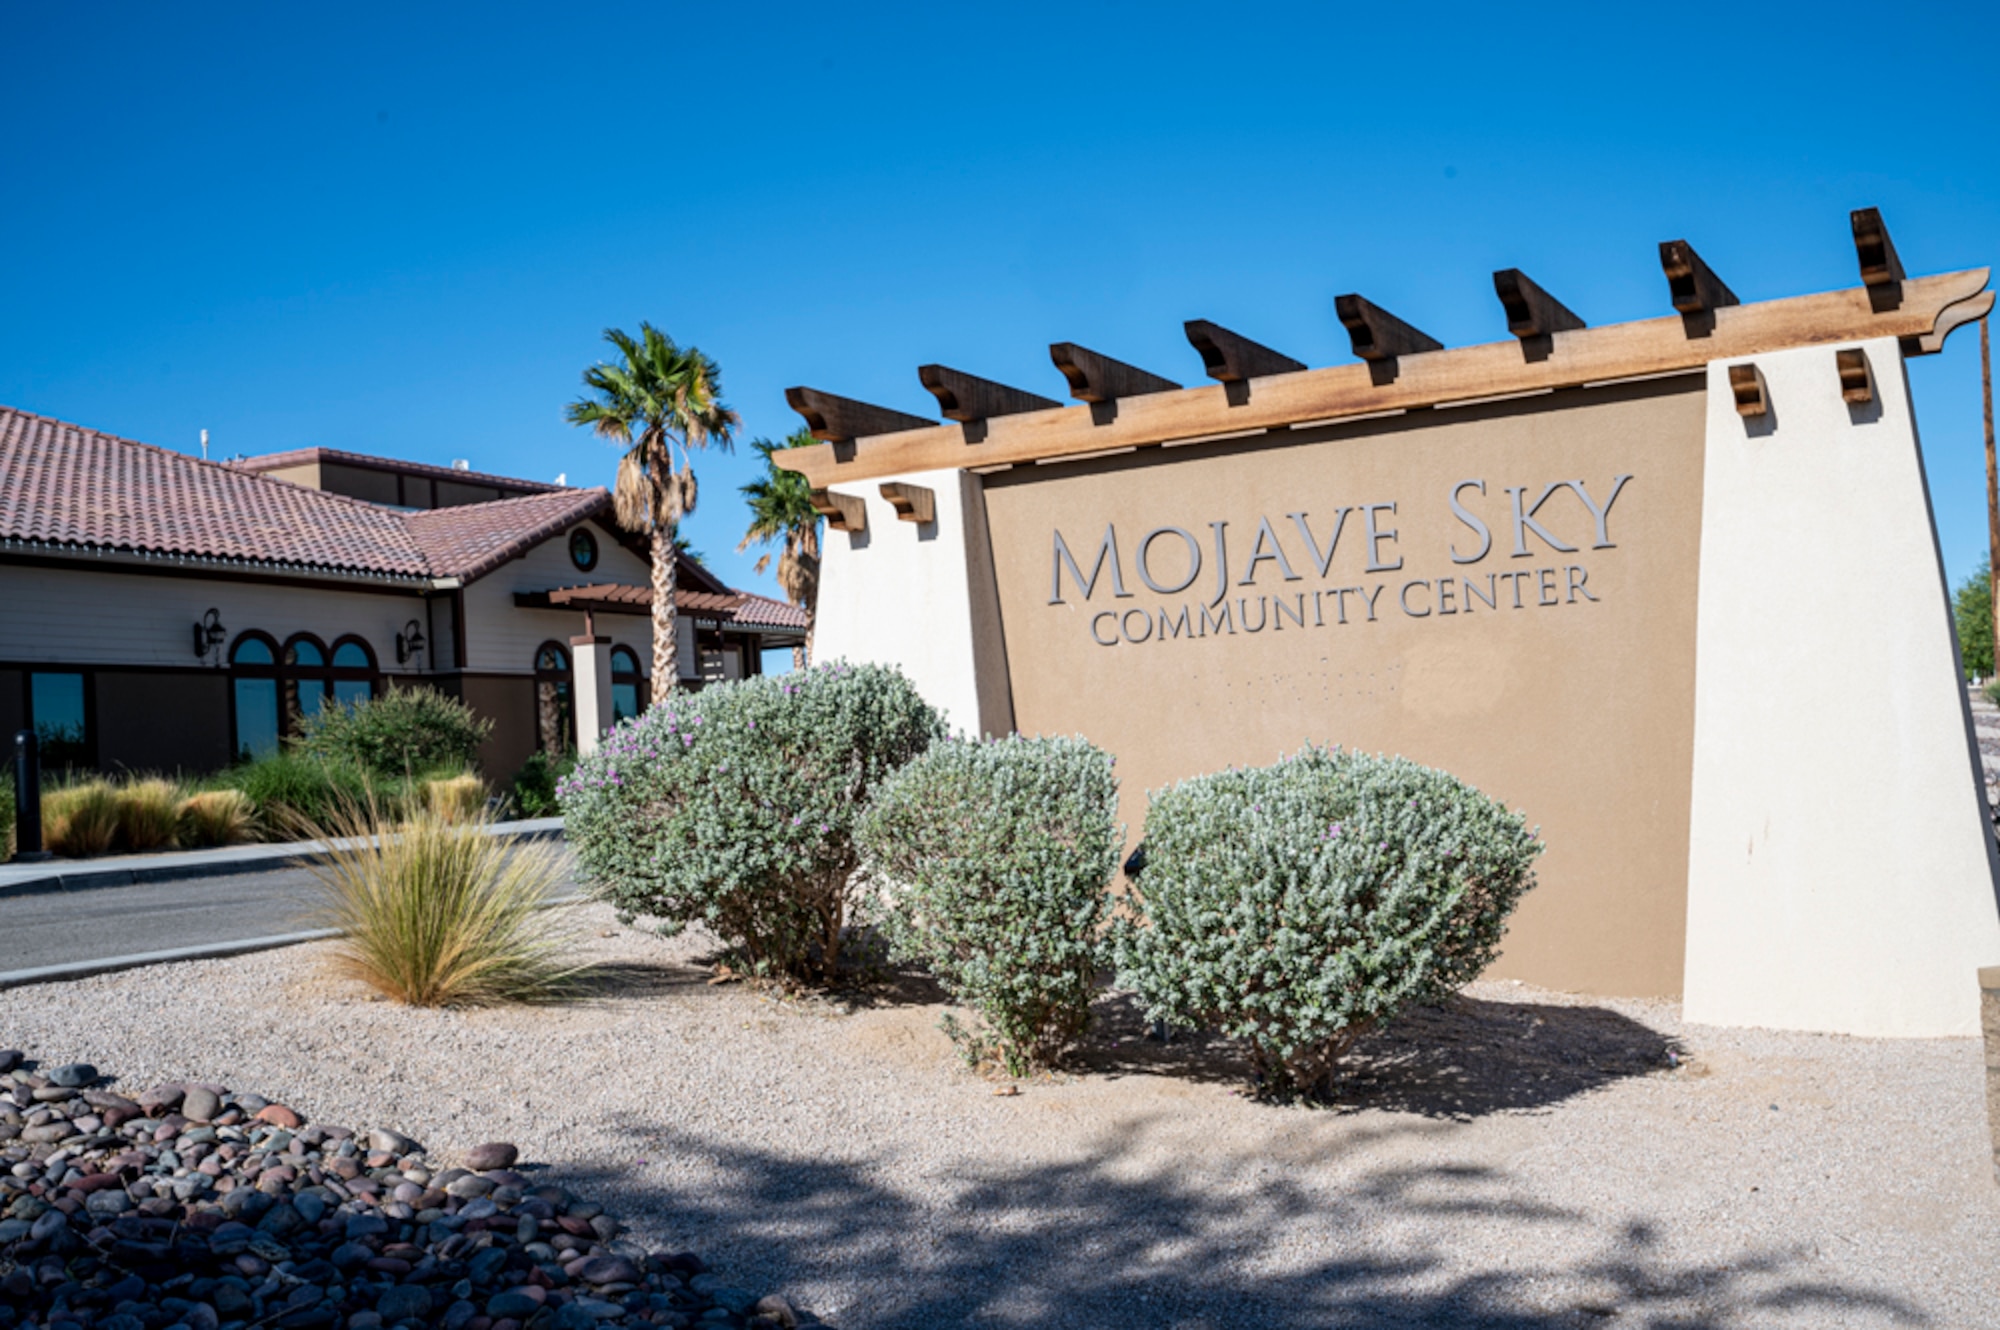 Mayroad, which provides on-base housing for more than 14,000 residents, ranked number one out of 67 Air Force locations in overall score as part of the 2021 DoD Tenant Satisfaction Survey and was the only company to receive a Very Good rating. Edwards AFB was one of them.